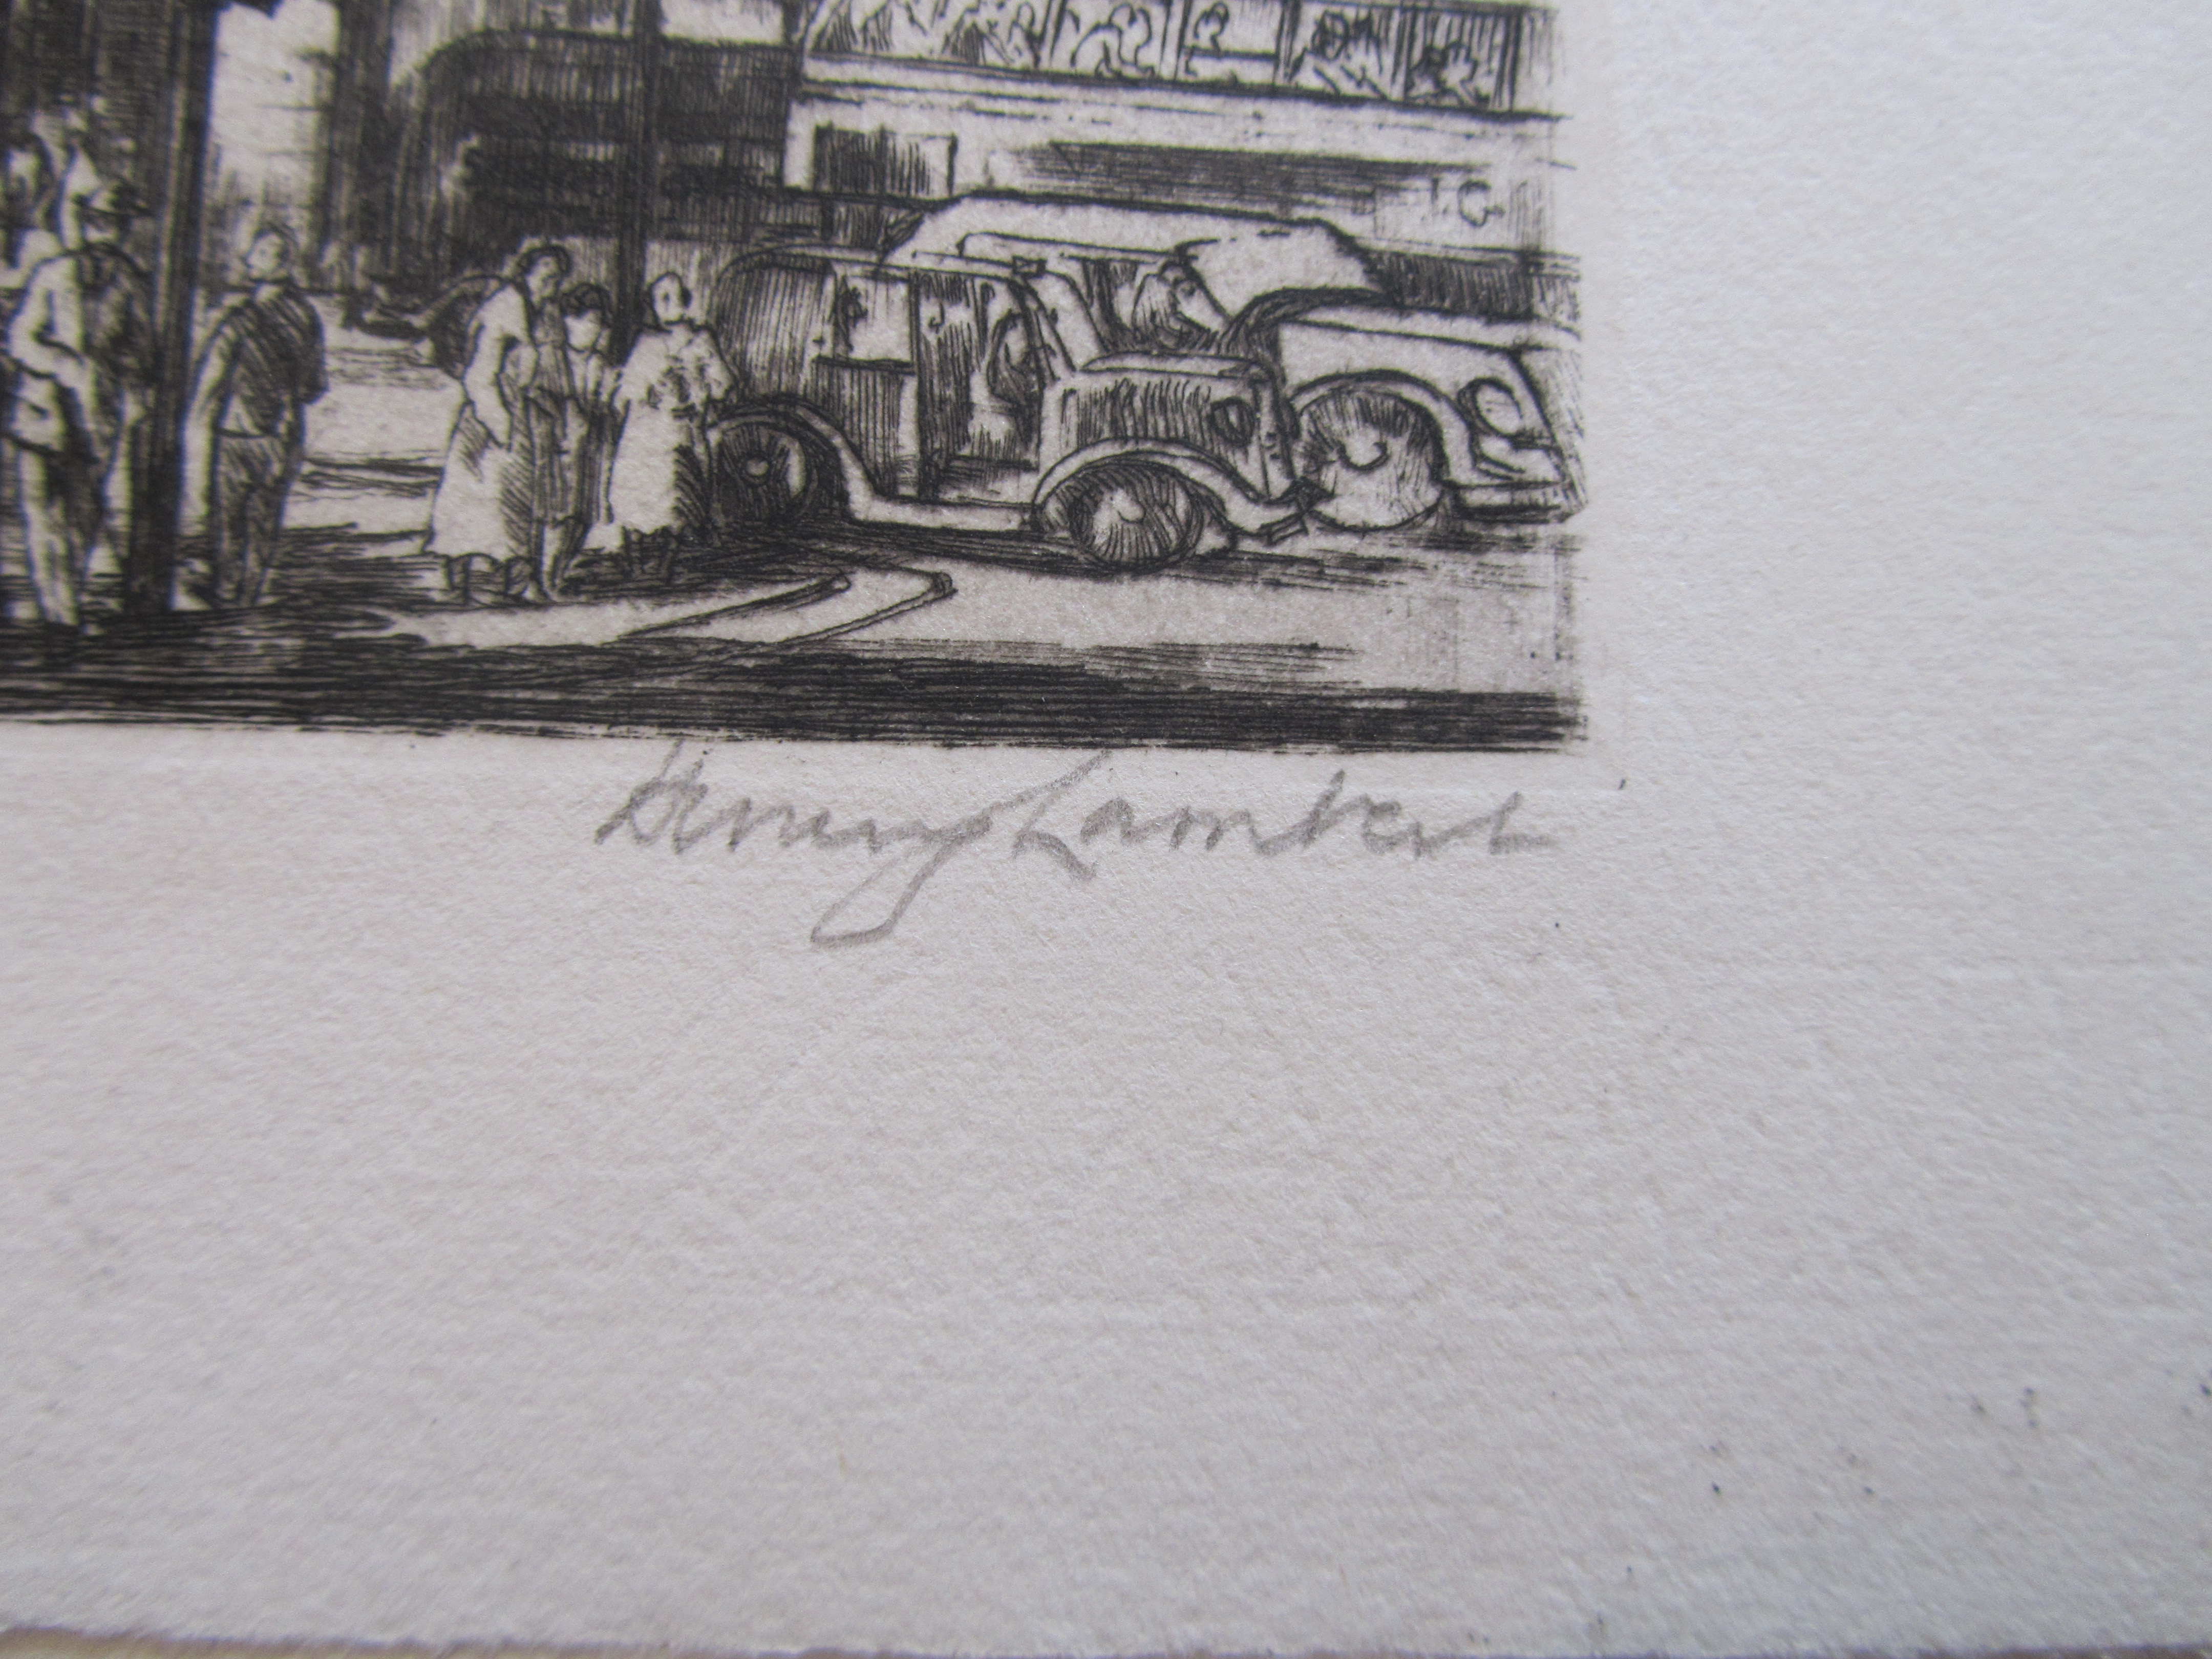 Terence Henry Lambert (British, b.1891) 'Piccadilly Circus' & Lincoln's Inn' London, etchings - Image 5 of 5